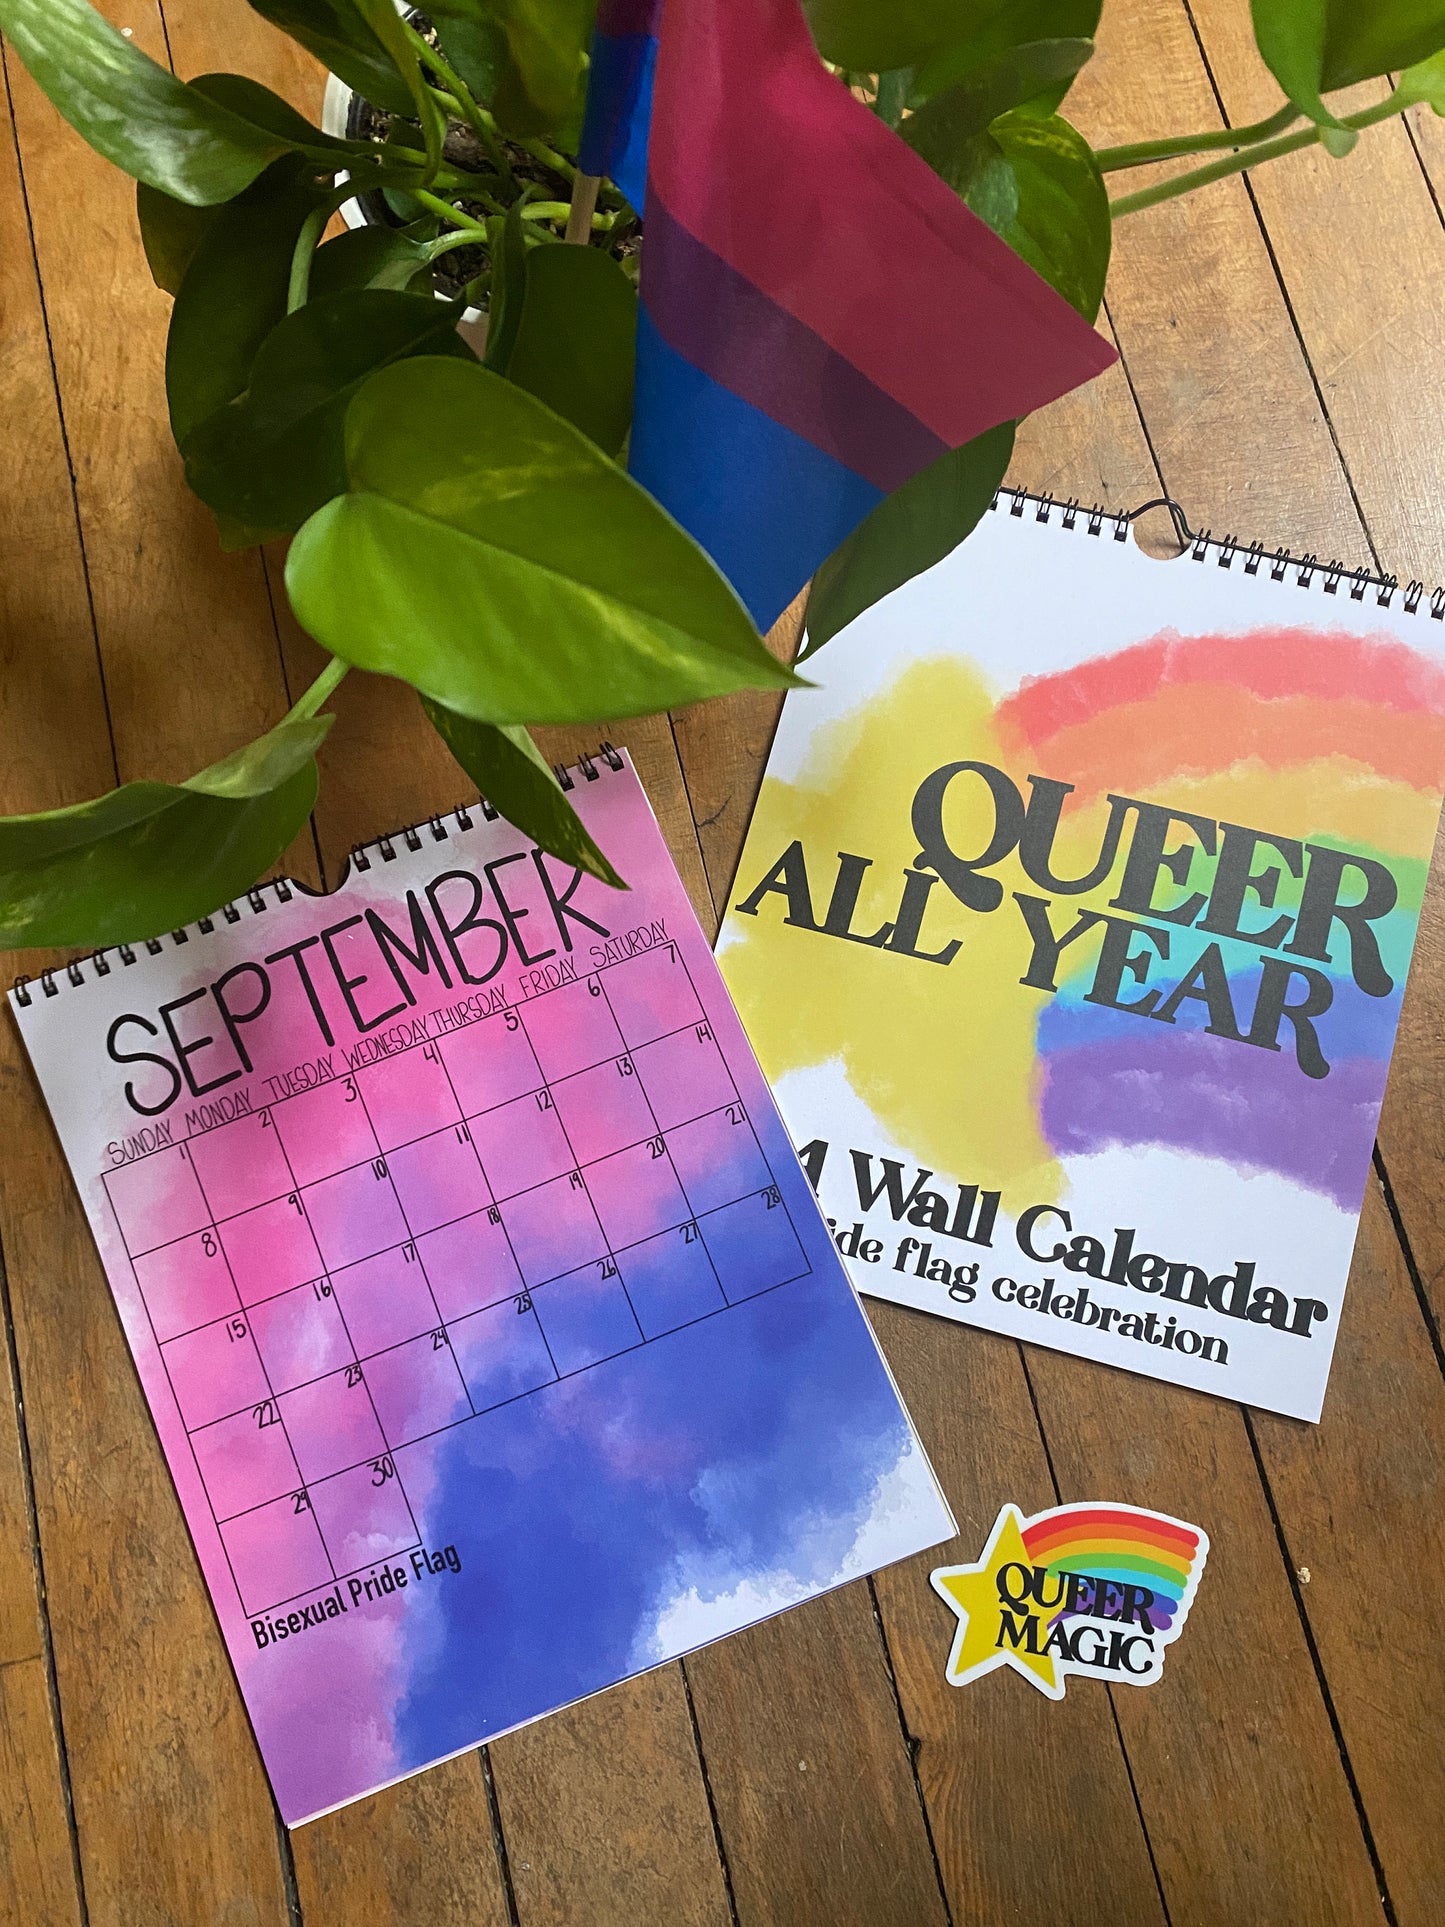 Queer All Year, 2024 12 Month Wall Calendar,  Celebrating Pride Flag colors, Gay calendar, Queer Gifts, Gifts for Pride, 2024 Pride Calendar